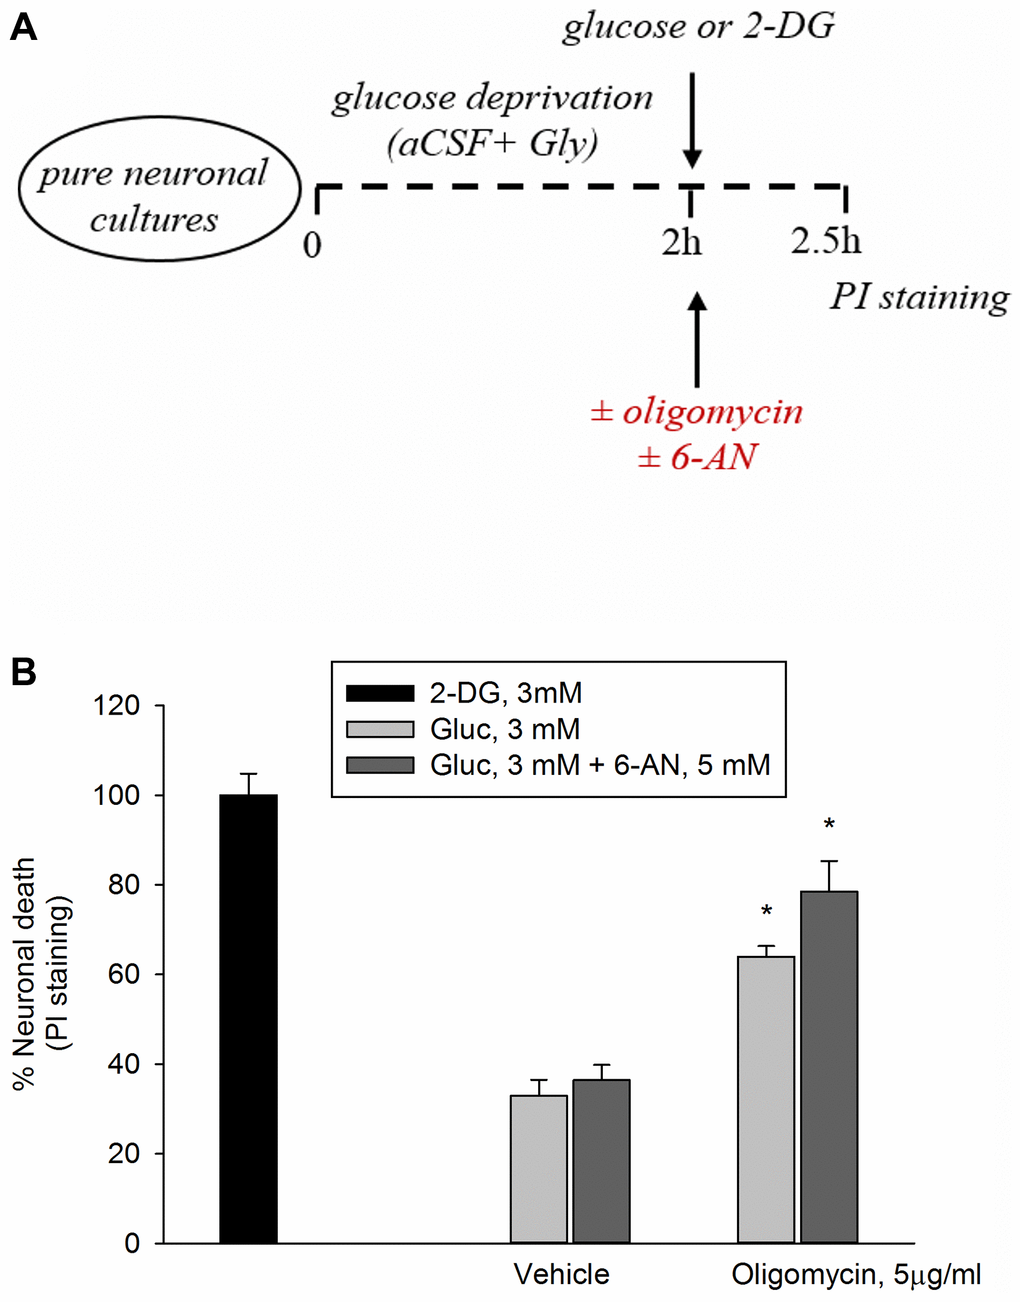 Inhibition of the PP pathway by 6-aminonicotinamide did not increase significantly oligomycin toxicity. Experiments were performed as represented in the drawing. (A) Following 2 hours of glucose deprivation, neurons were returned to 3 mM glucose (Gluc) in either the absence or the presence of oligomycin (5 μg/ml) to inhibit ATP synthase. (B) Oligomycin induced a 60% neuronal death after 2.5 hours, whereas 2-deoxyglucose (2-DG, 3 mM), which inhibits overall glucose metabolism, virtually killed all neurons. The addition of 6-aminonicotinamide (6-AN, 5 mM) did not potentiate significantly oligomycin toxicity. Neuronal death was quantified by propidium iodide (PI) staining of neurons that had lost membrane integrity and expressed as percentage of 2-DG-induced death. Bars represent the means ± SEM of 4 determinations. *P 